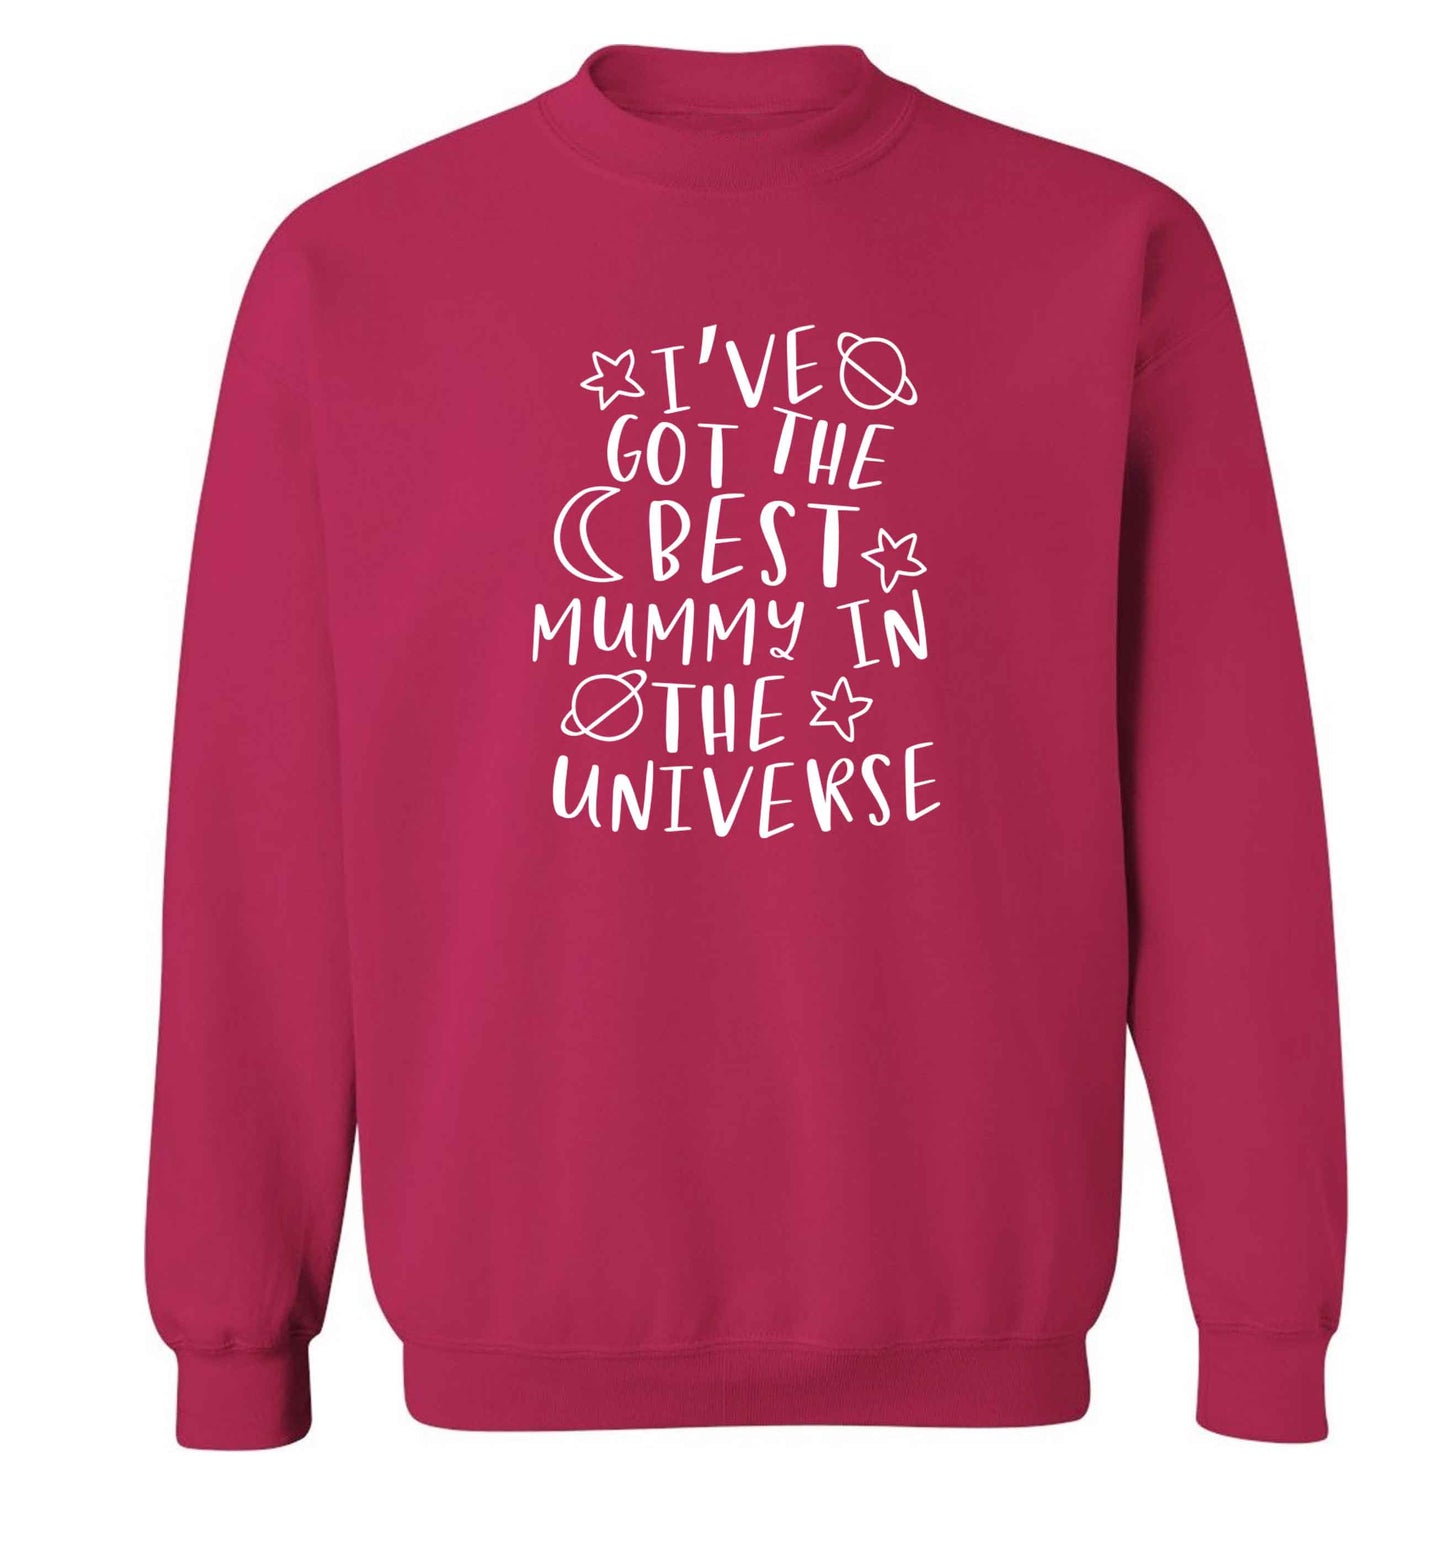 I've got the best mummy in the universe adult's unisex pink sweater 2XL